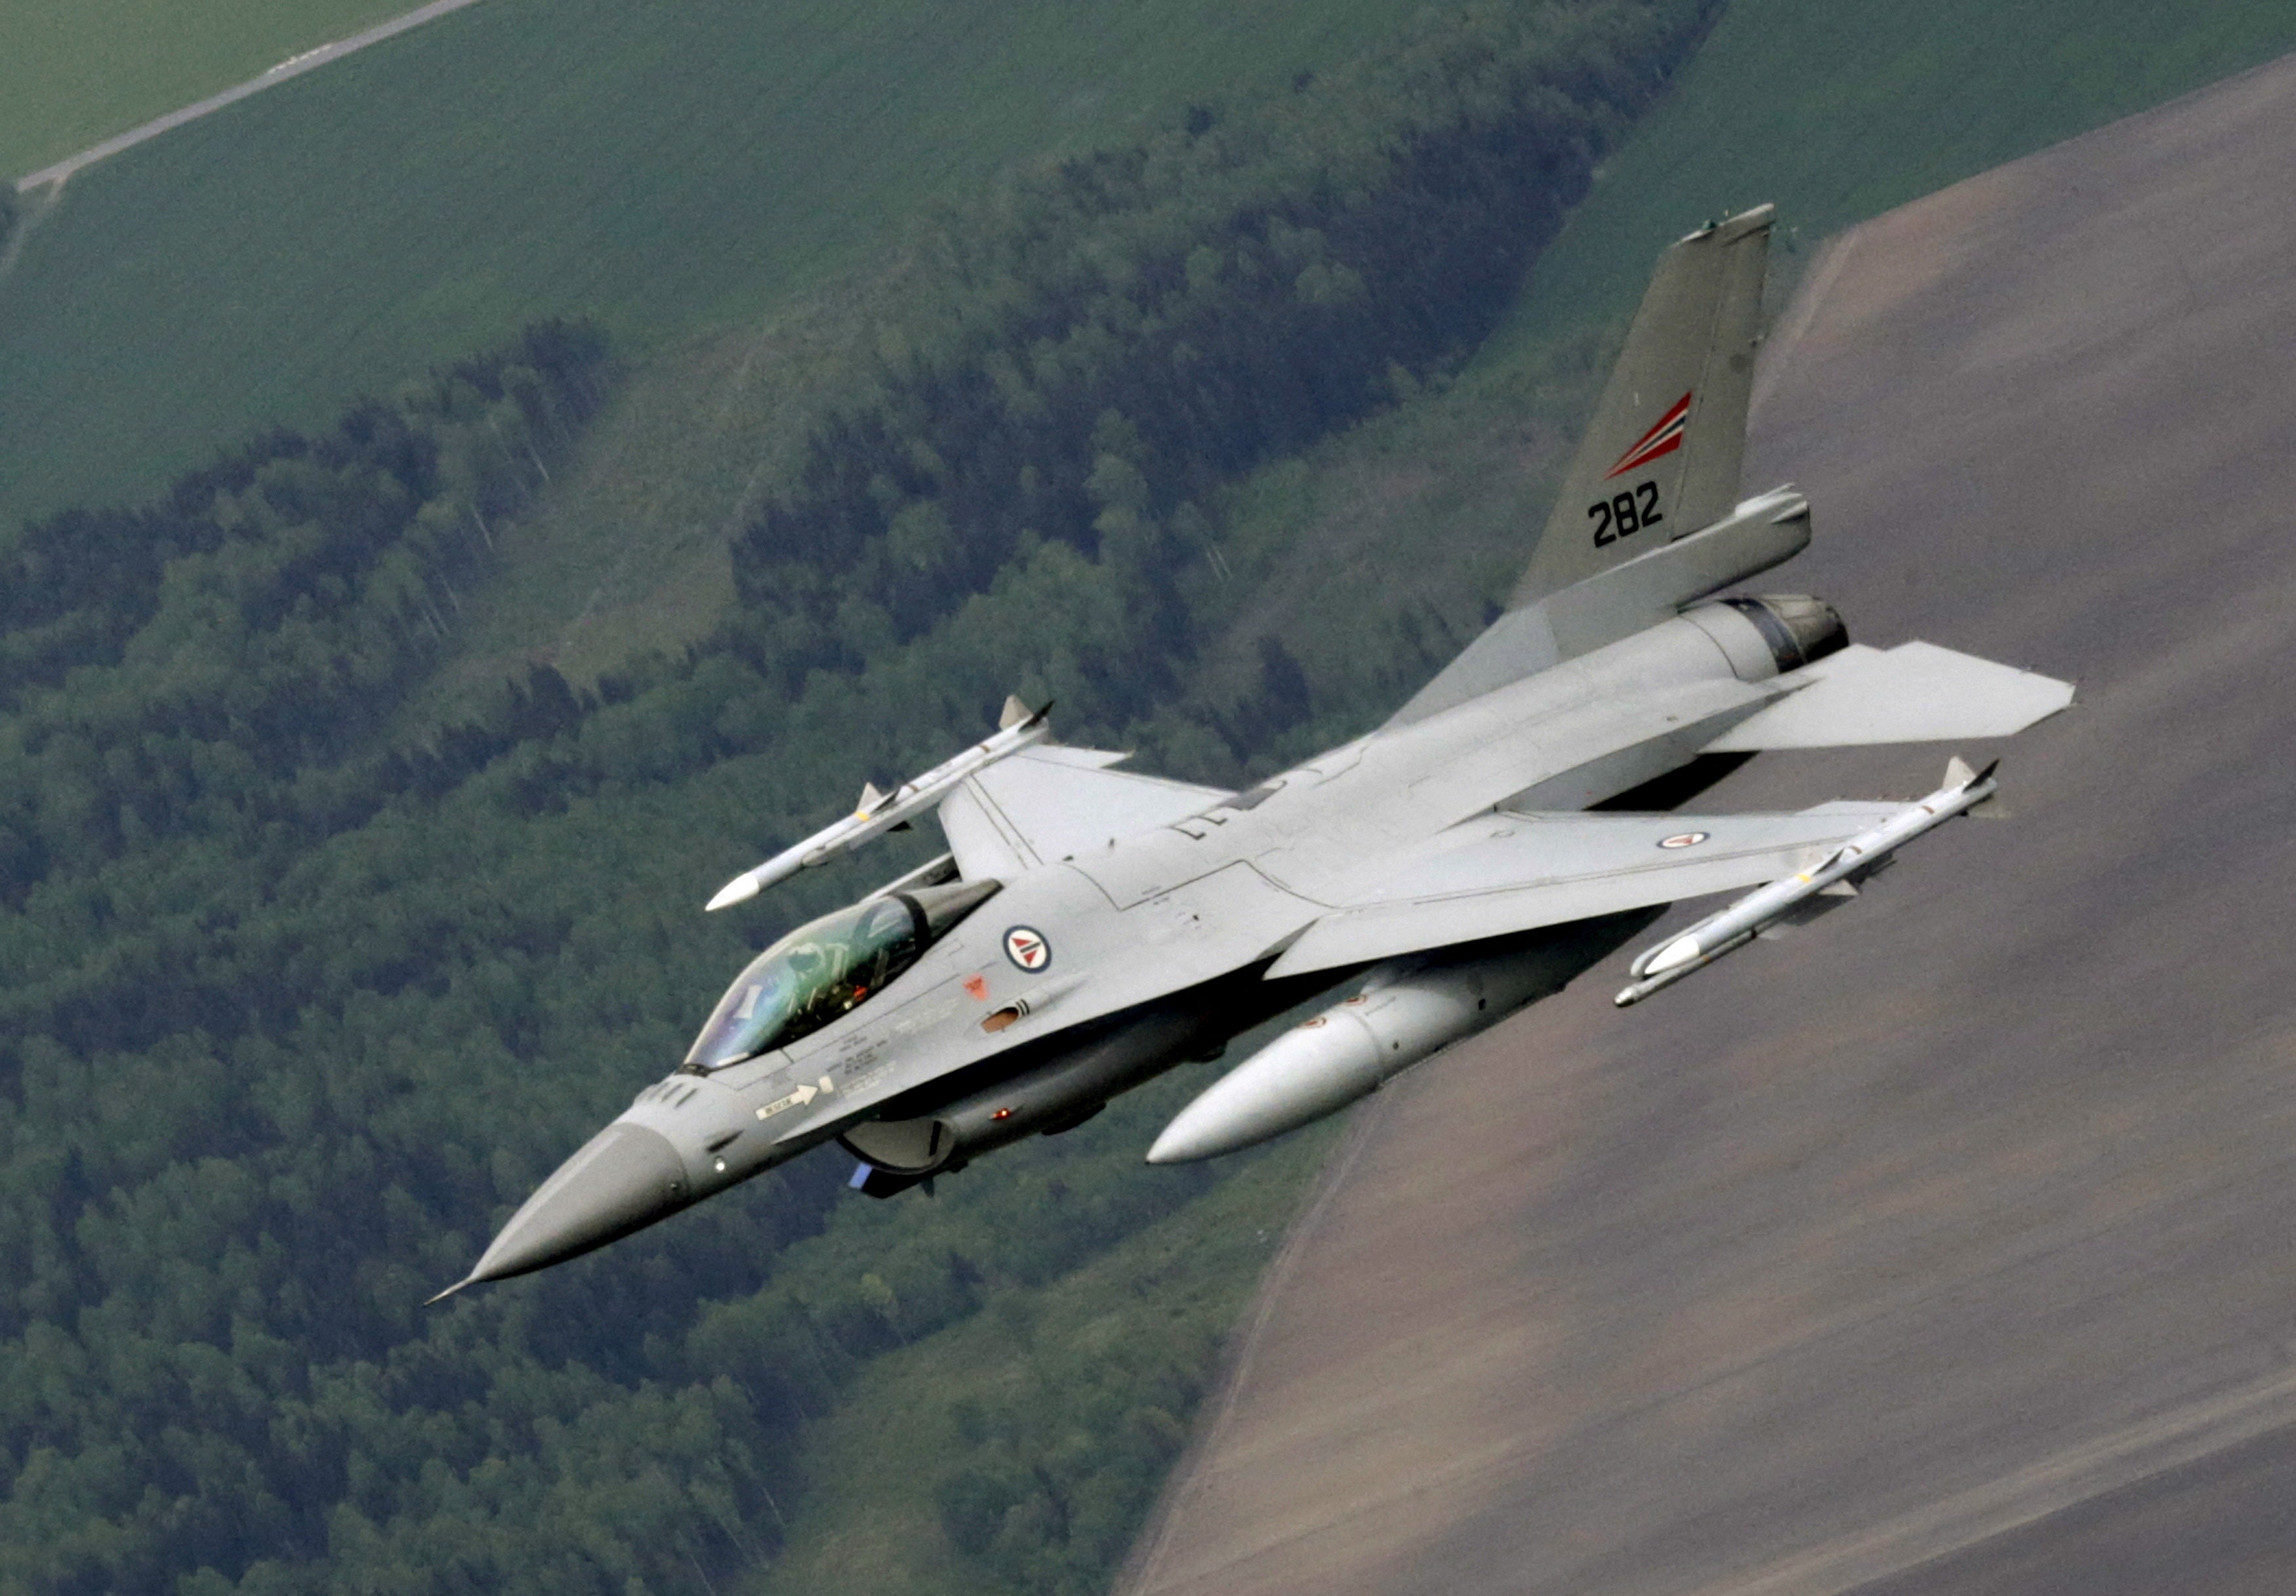 A Norwegian Air Force F-16 fighter patrols over the Baltics during a Nato air policing mission from Zokniai airbase near Siauliai